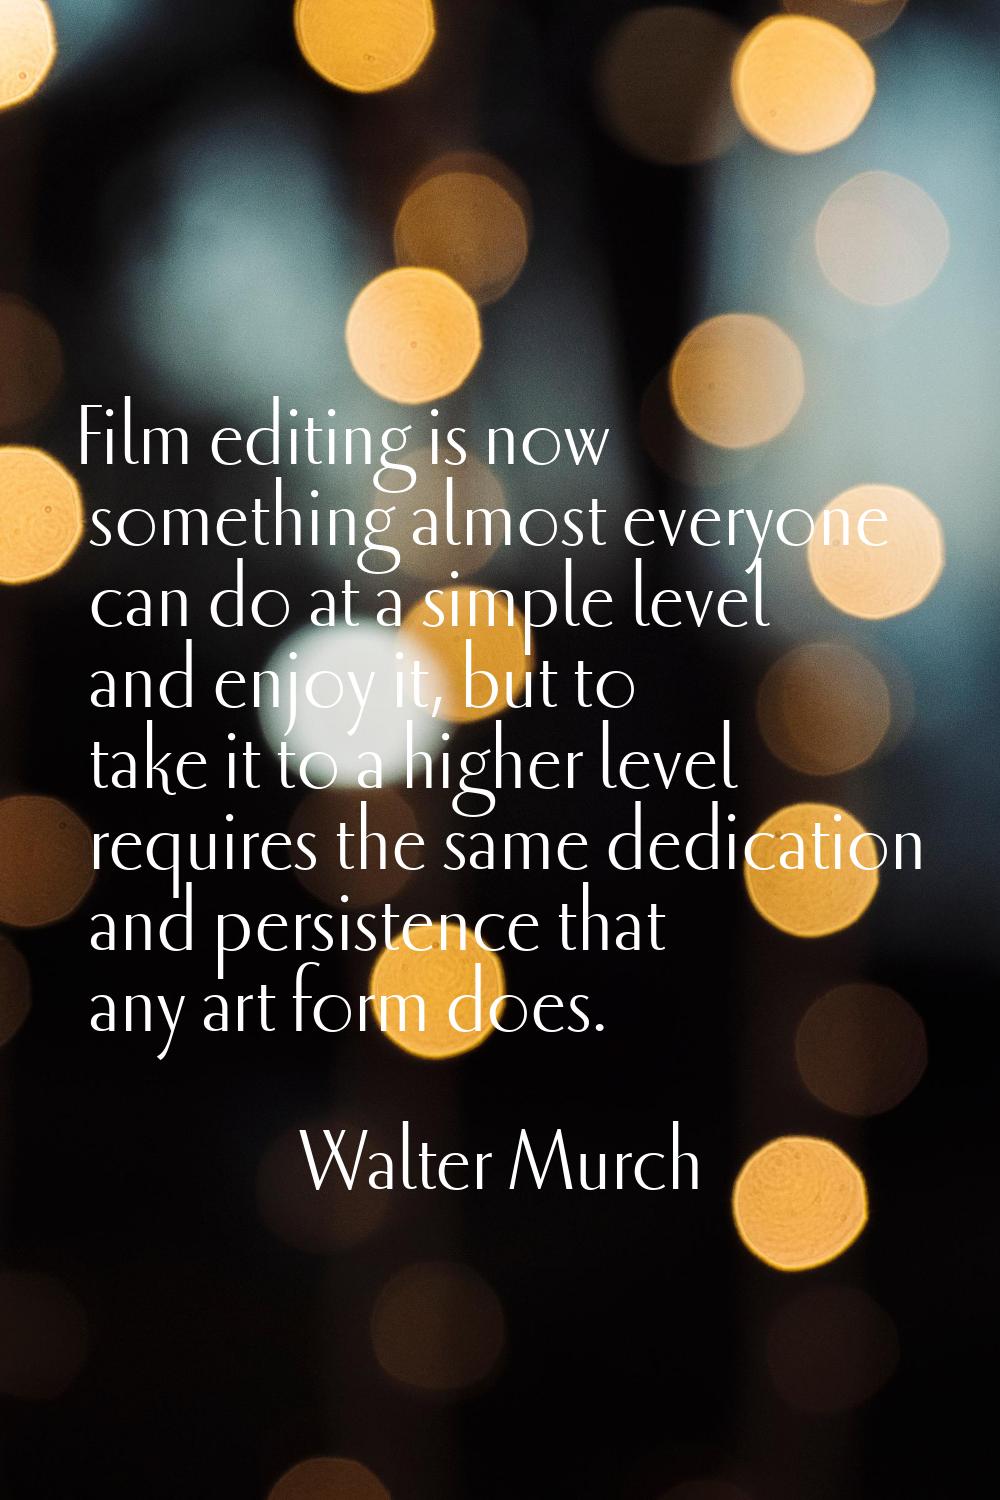 Film editing is now something almost everyone can do at a simple level and enjoy it, but to take it